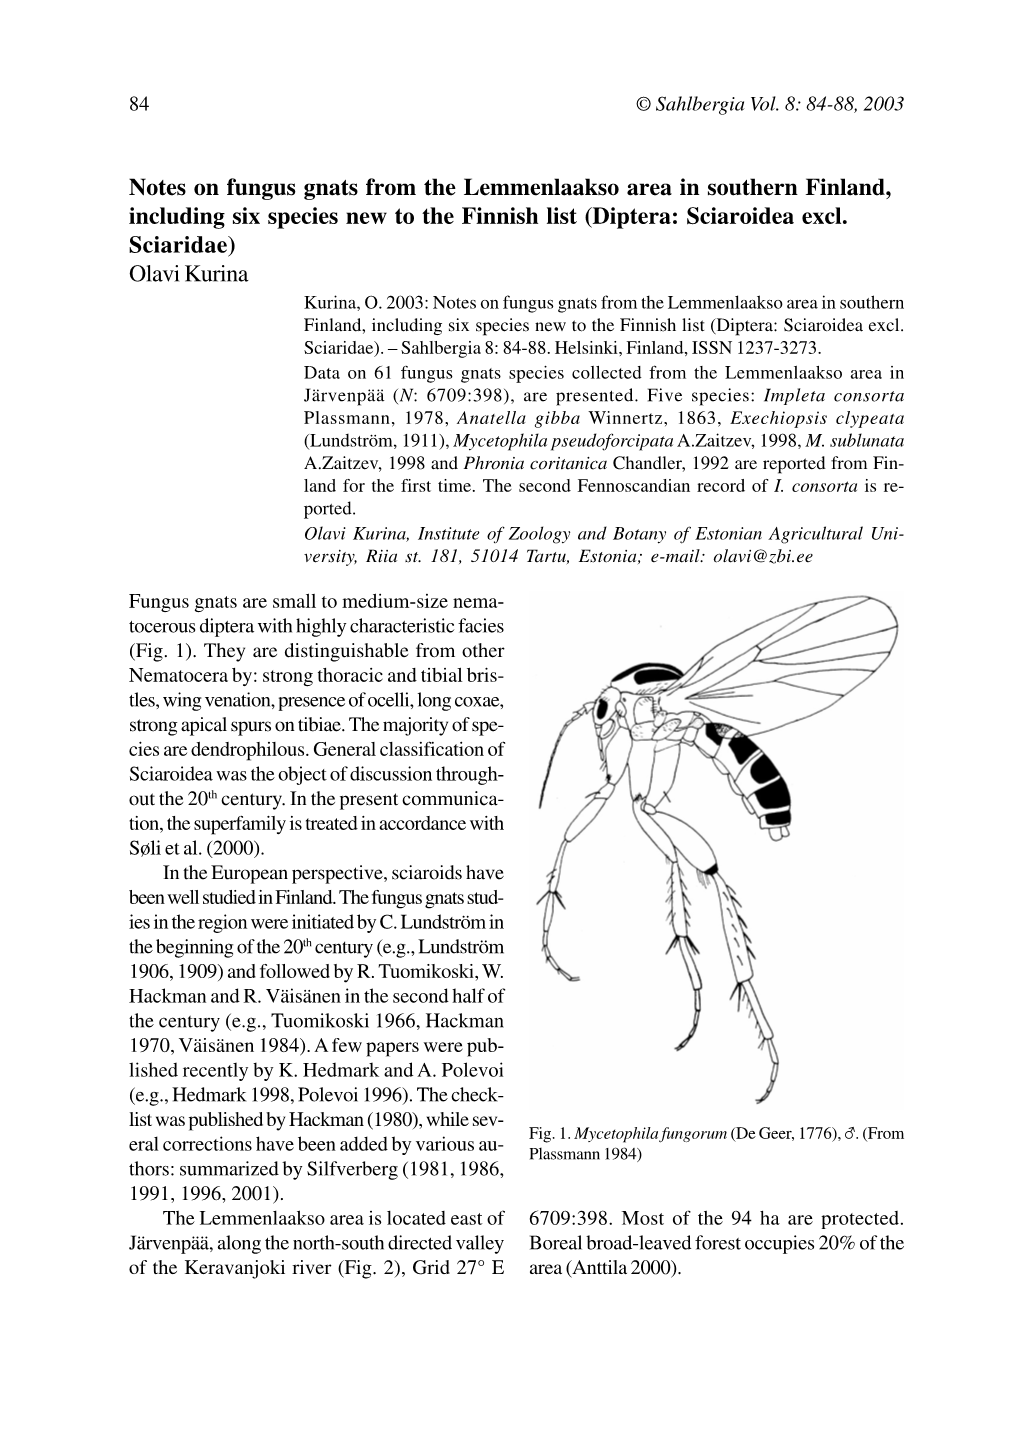 Notes on Fungus Gnats from the Lemmenlaakso Area in Southern Finland, Including Six Species New to the Finnish List (Diptera: Sciaroidea Excl